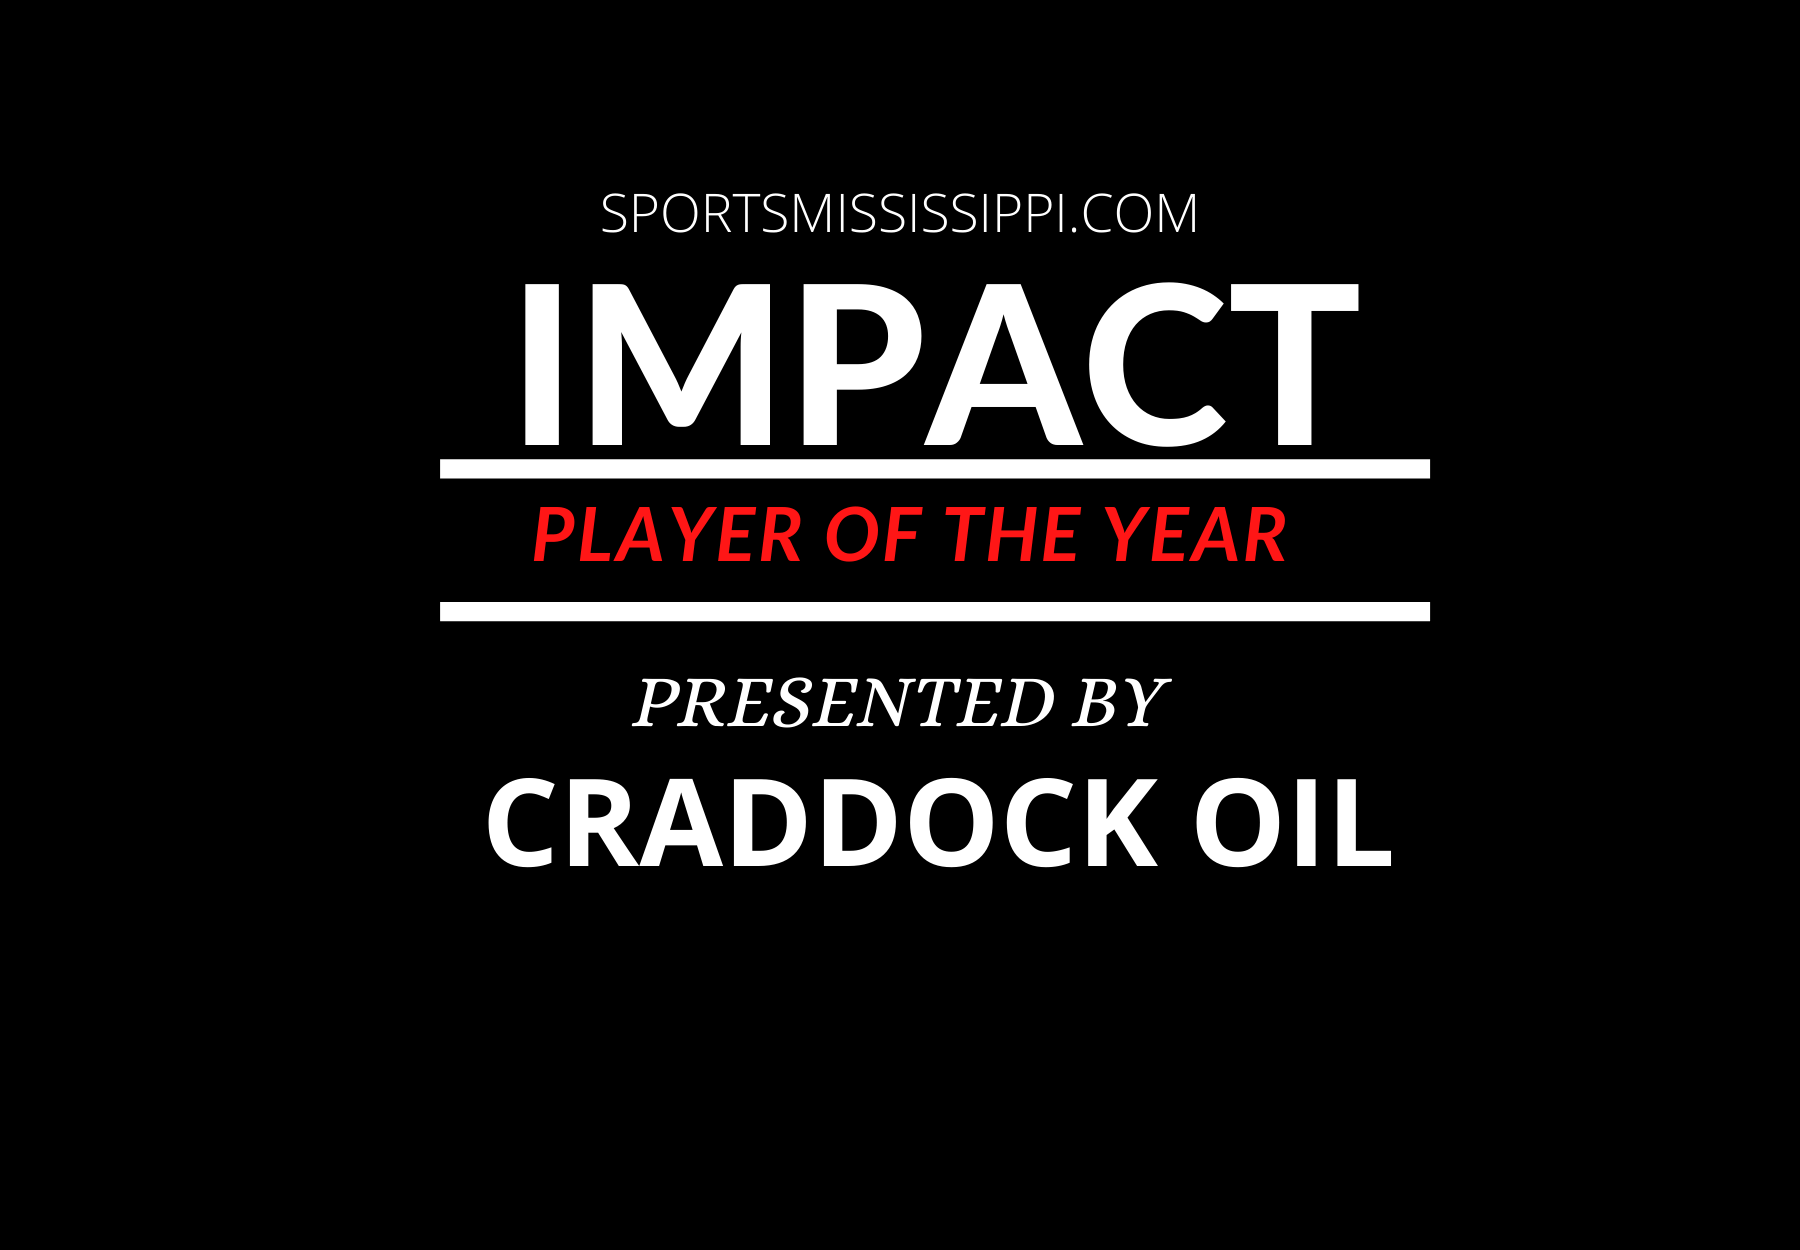 Nominations for IMPACT player of the year presented by Craddock Oil now open